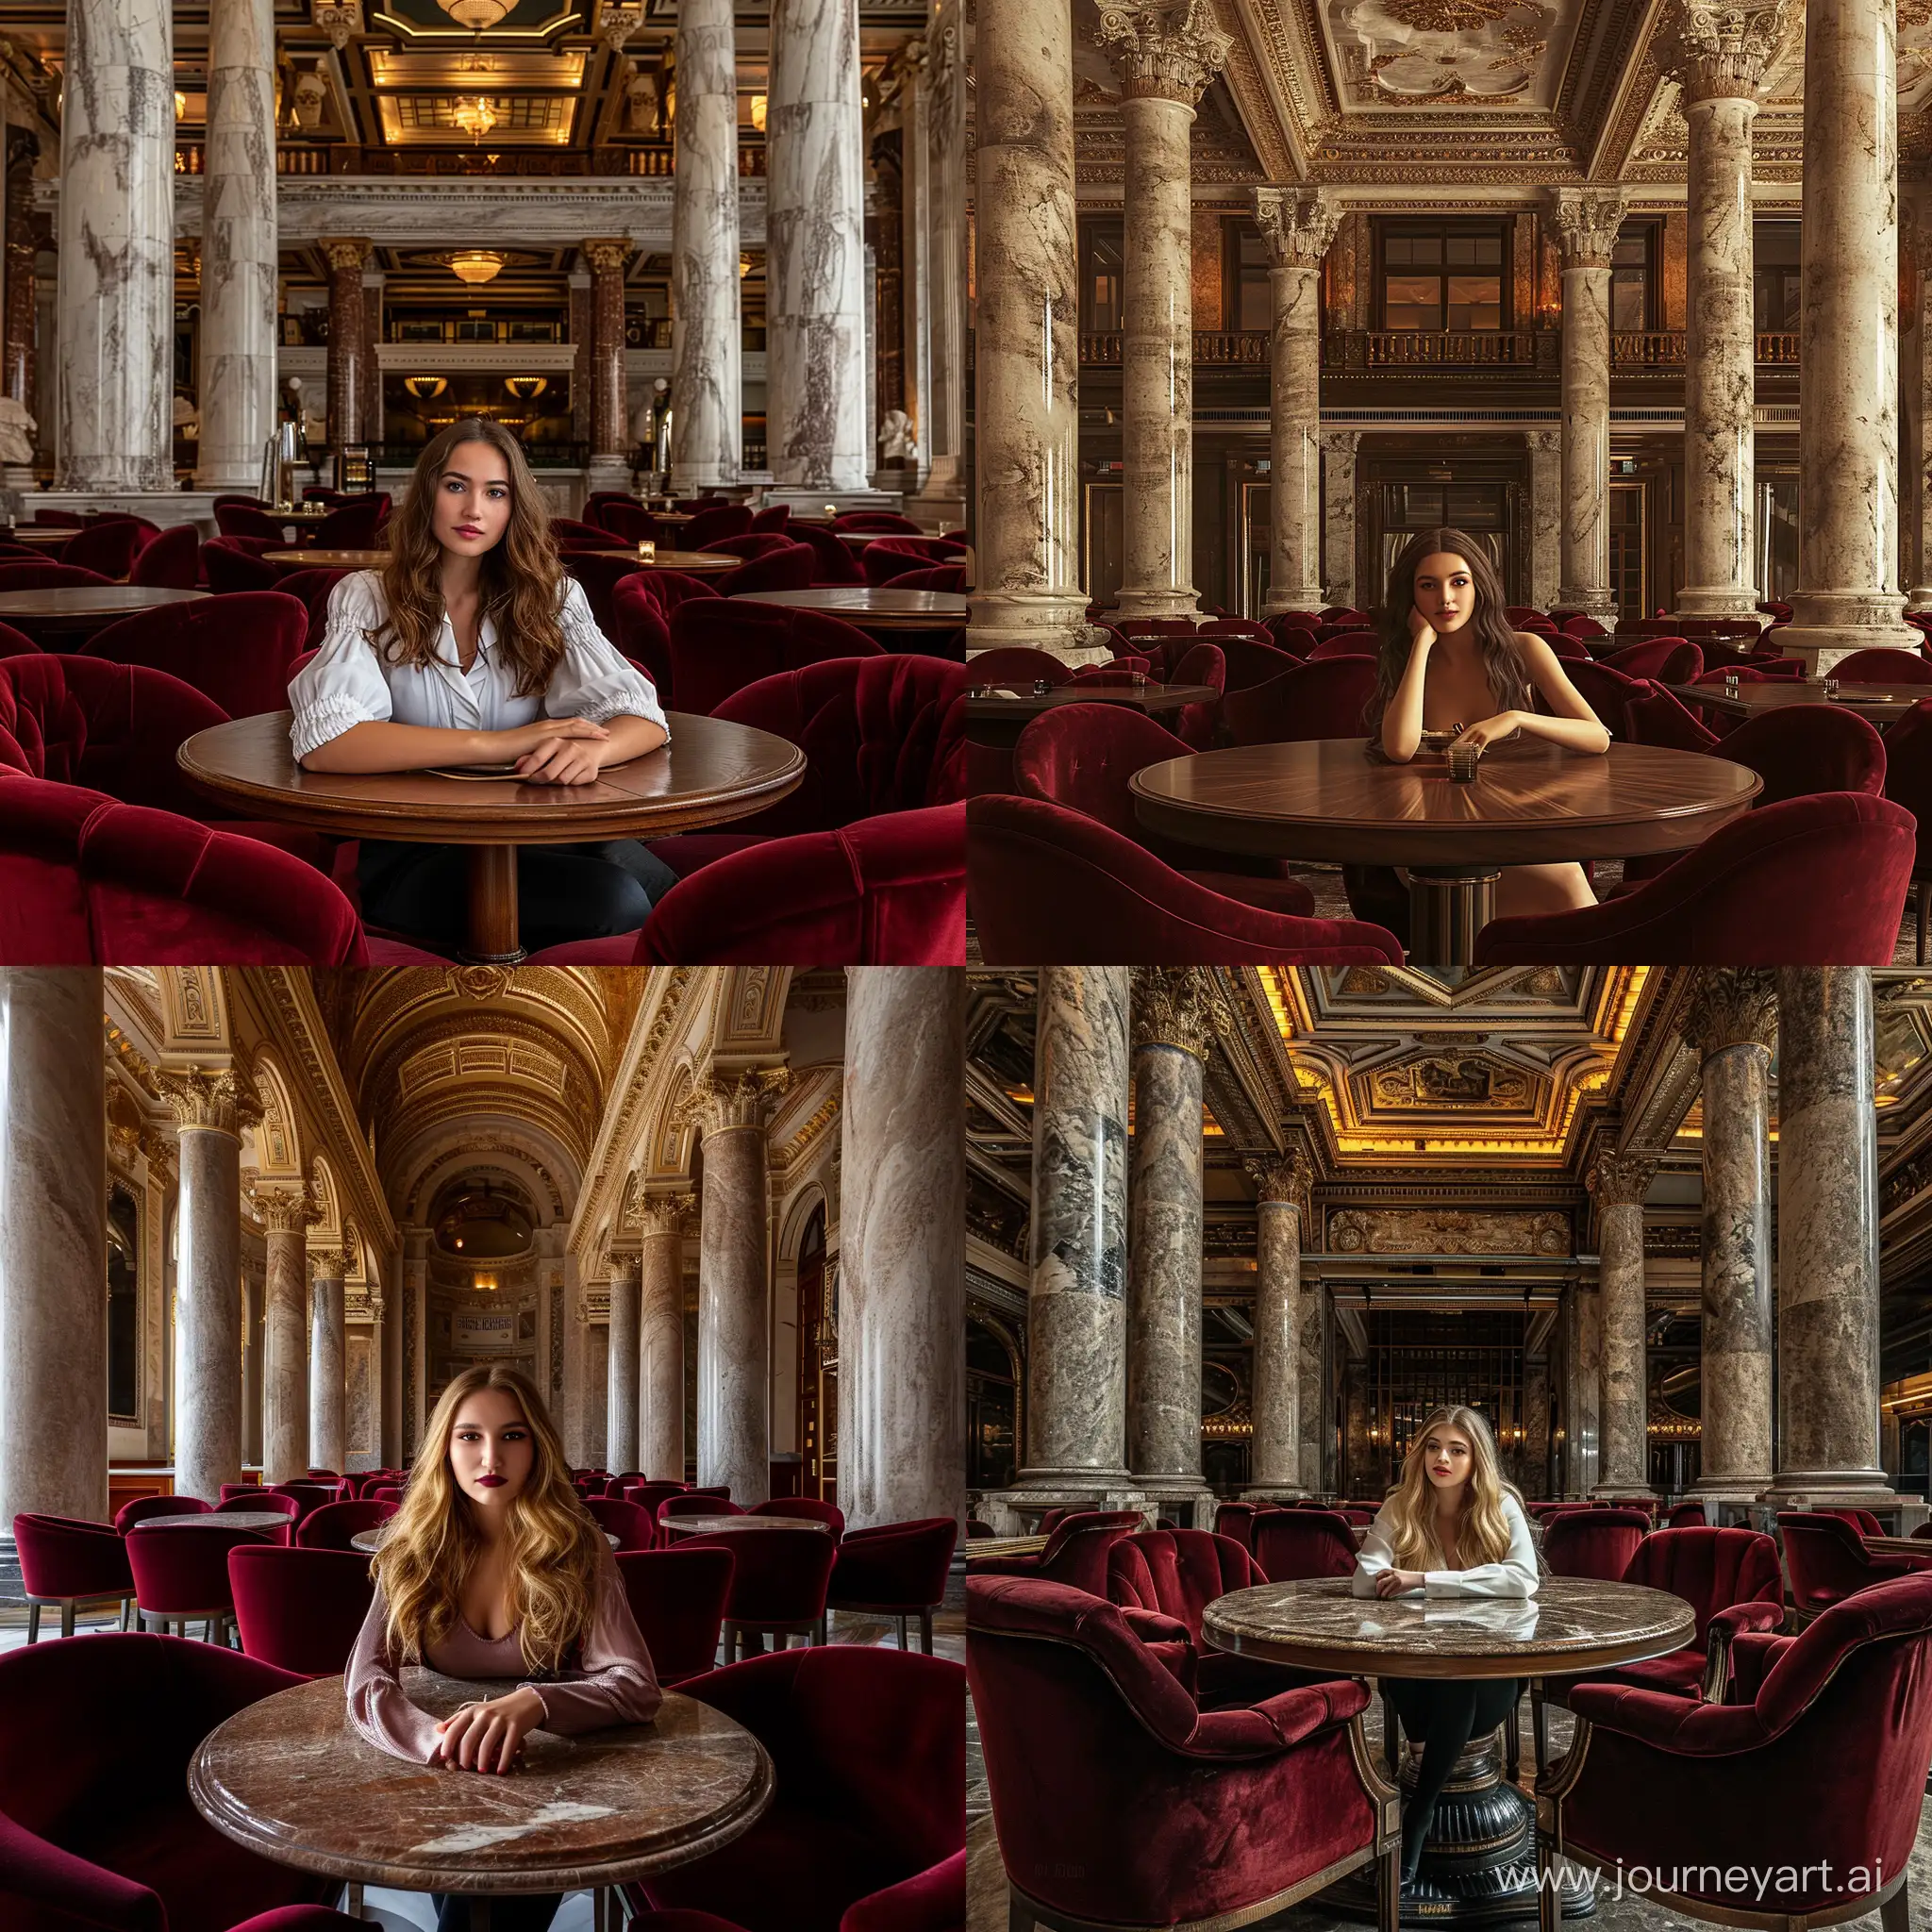 Brunette model who doesn’t exist in real life, sitting in a comfy neo-classical restaurant, deep blood red velvet chairs in a circular shape surrounding a ma mahogany table, double high ceiling, big marble pillars, 